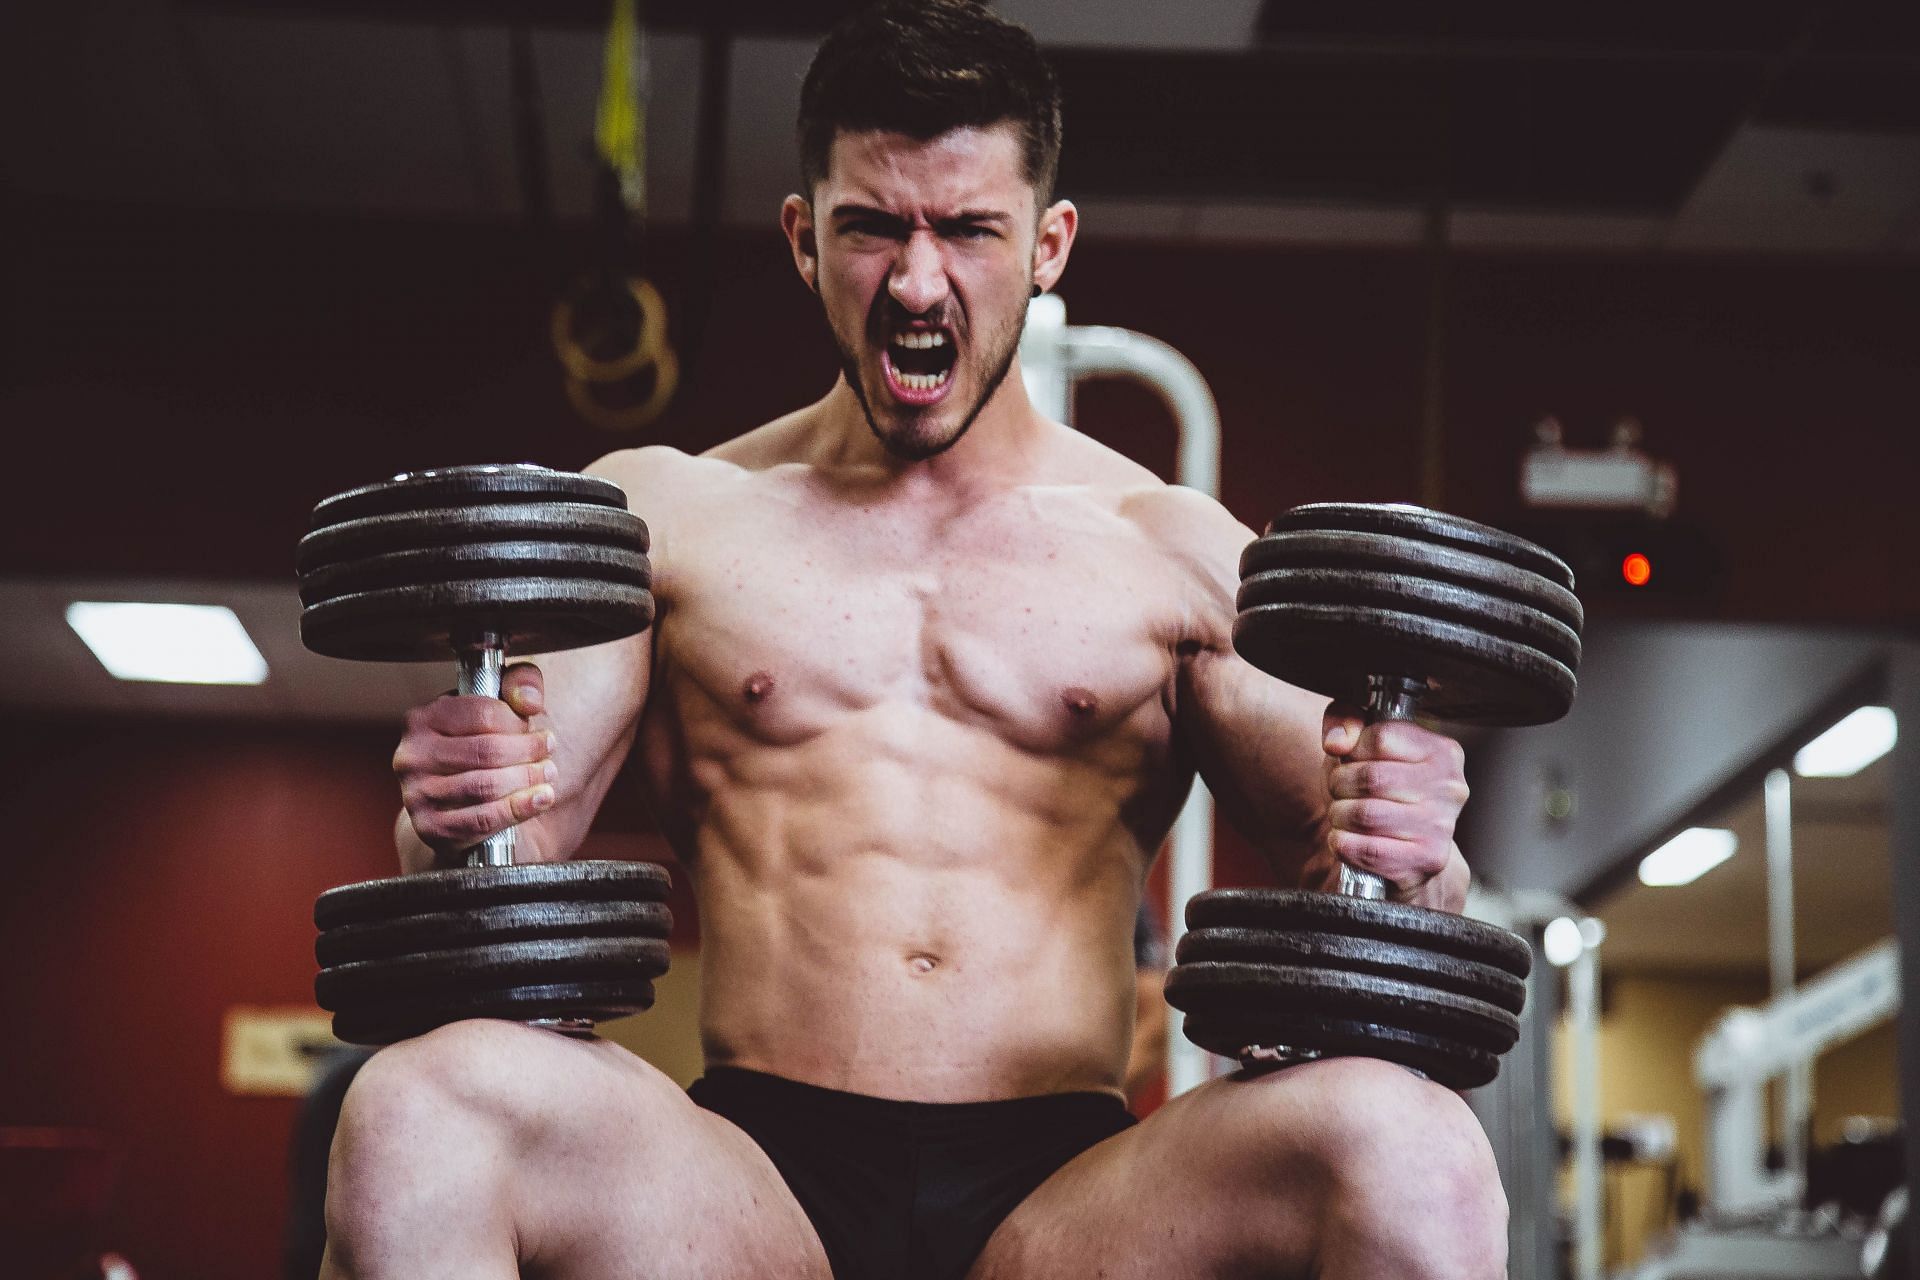 CrossFit exercises include high conditioning and strength movement. (Image via Unsplash/Alora Griffiths)